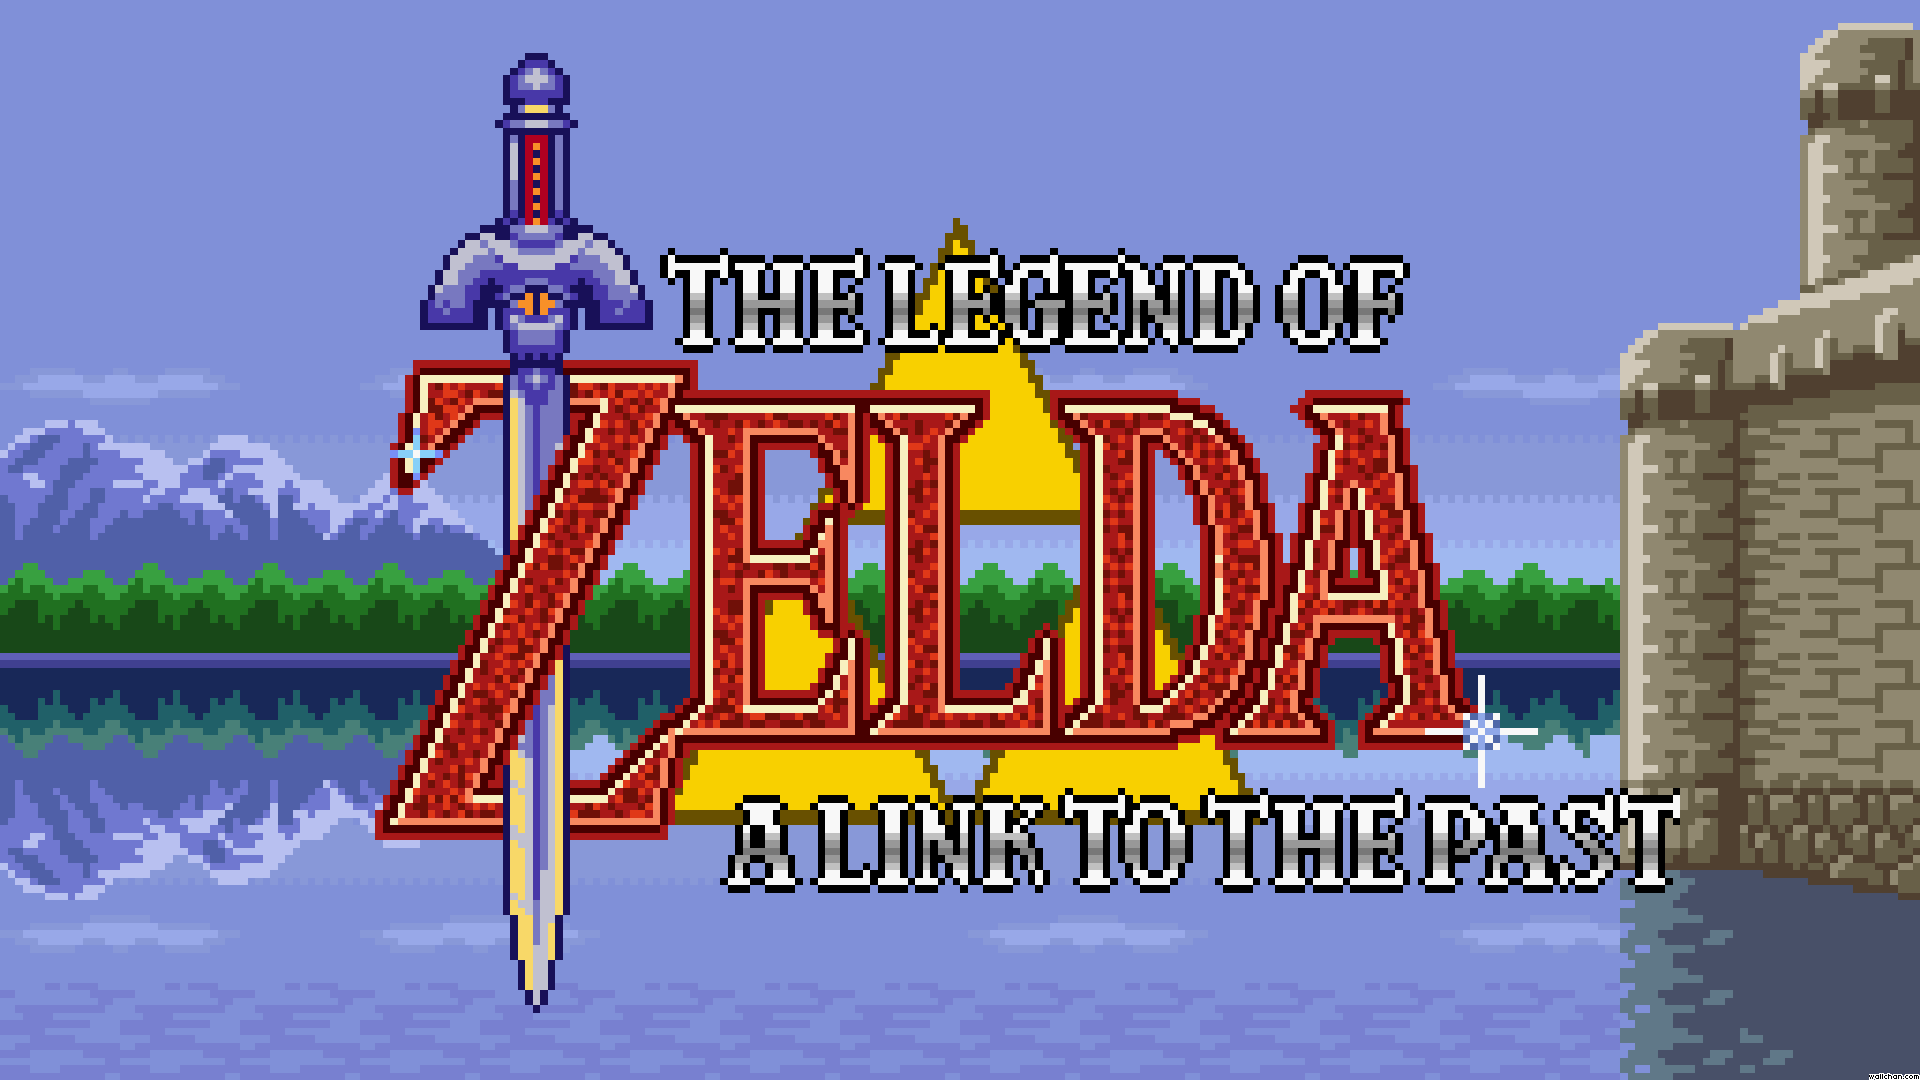 Some Similarities With The Classic A Link To Past For Snes